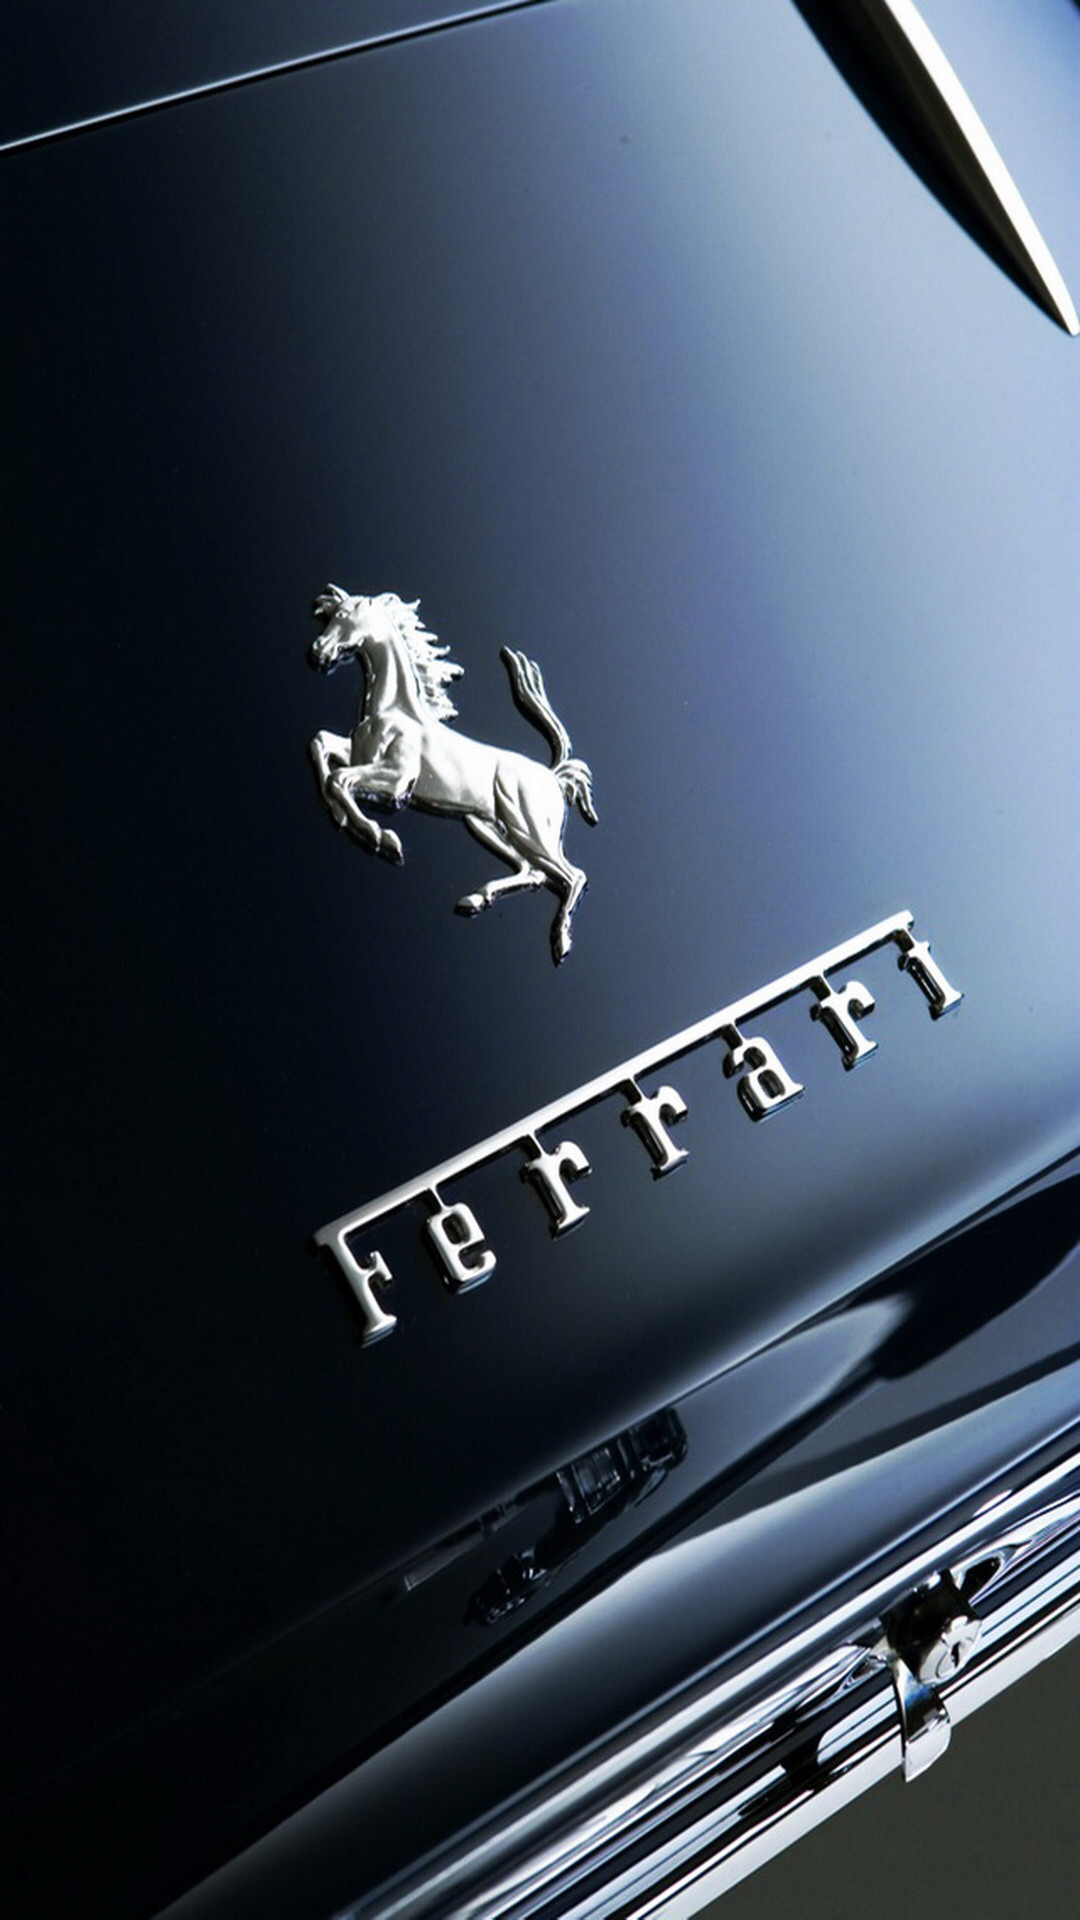 Check Out This Wallpaper For Your Iphone Black Ferrari Car Symbol 1080x19 Wallpaper Teahub Io